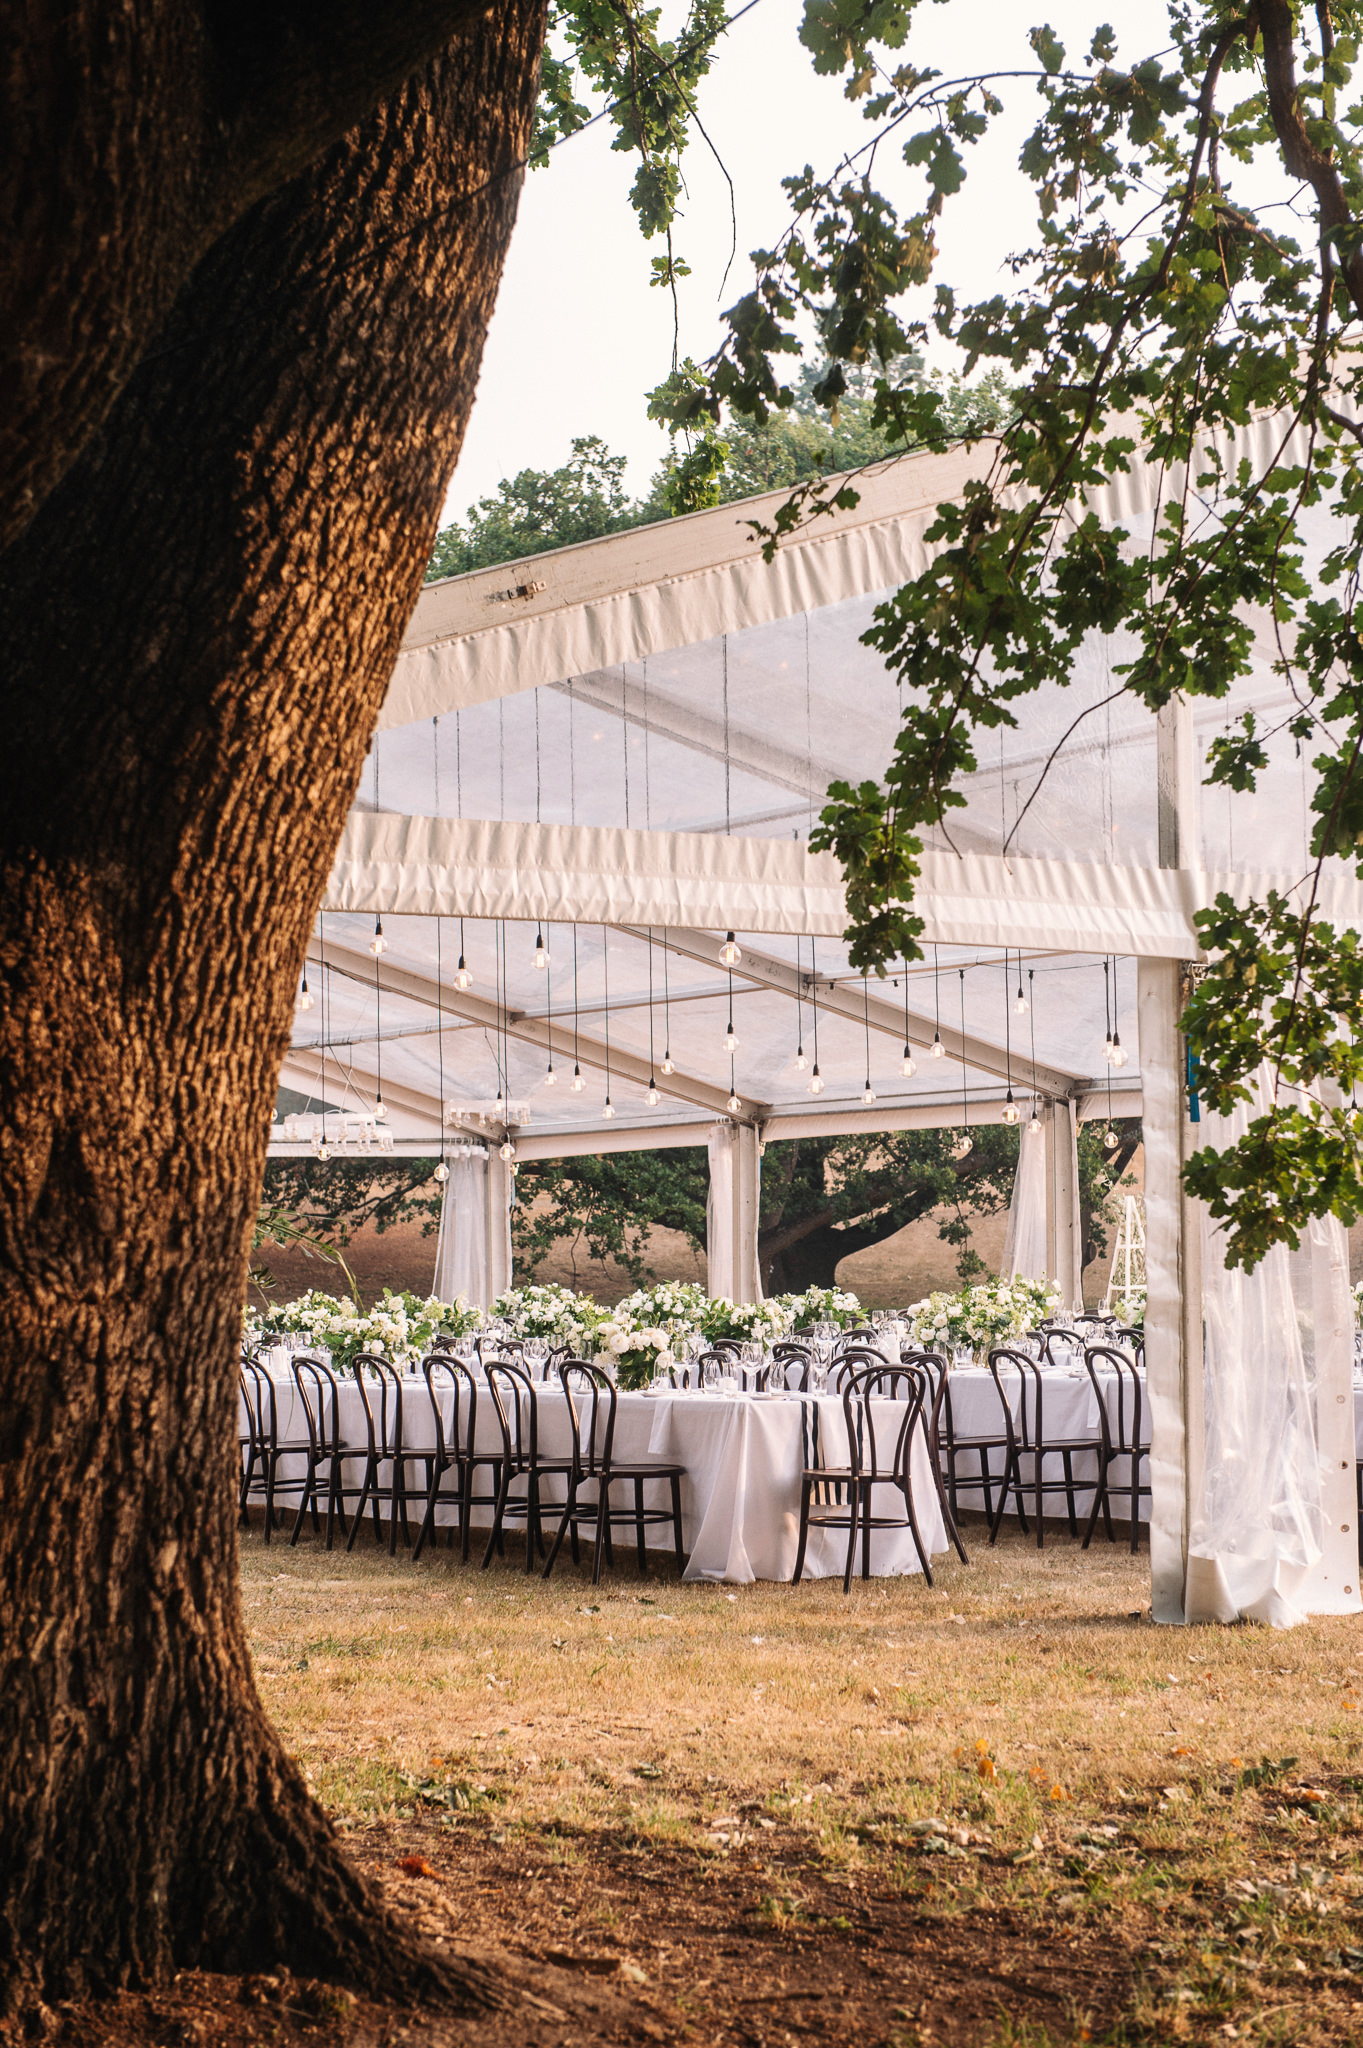  Entally Estate wedding with marquee reception on the oldest cricket pitch in Australia 